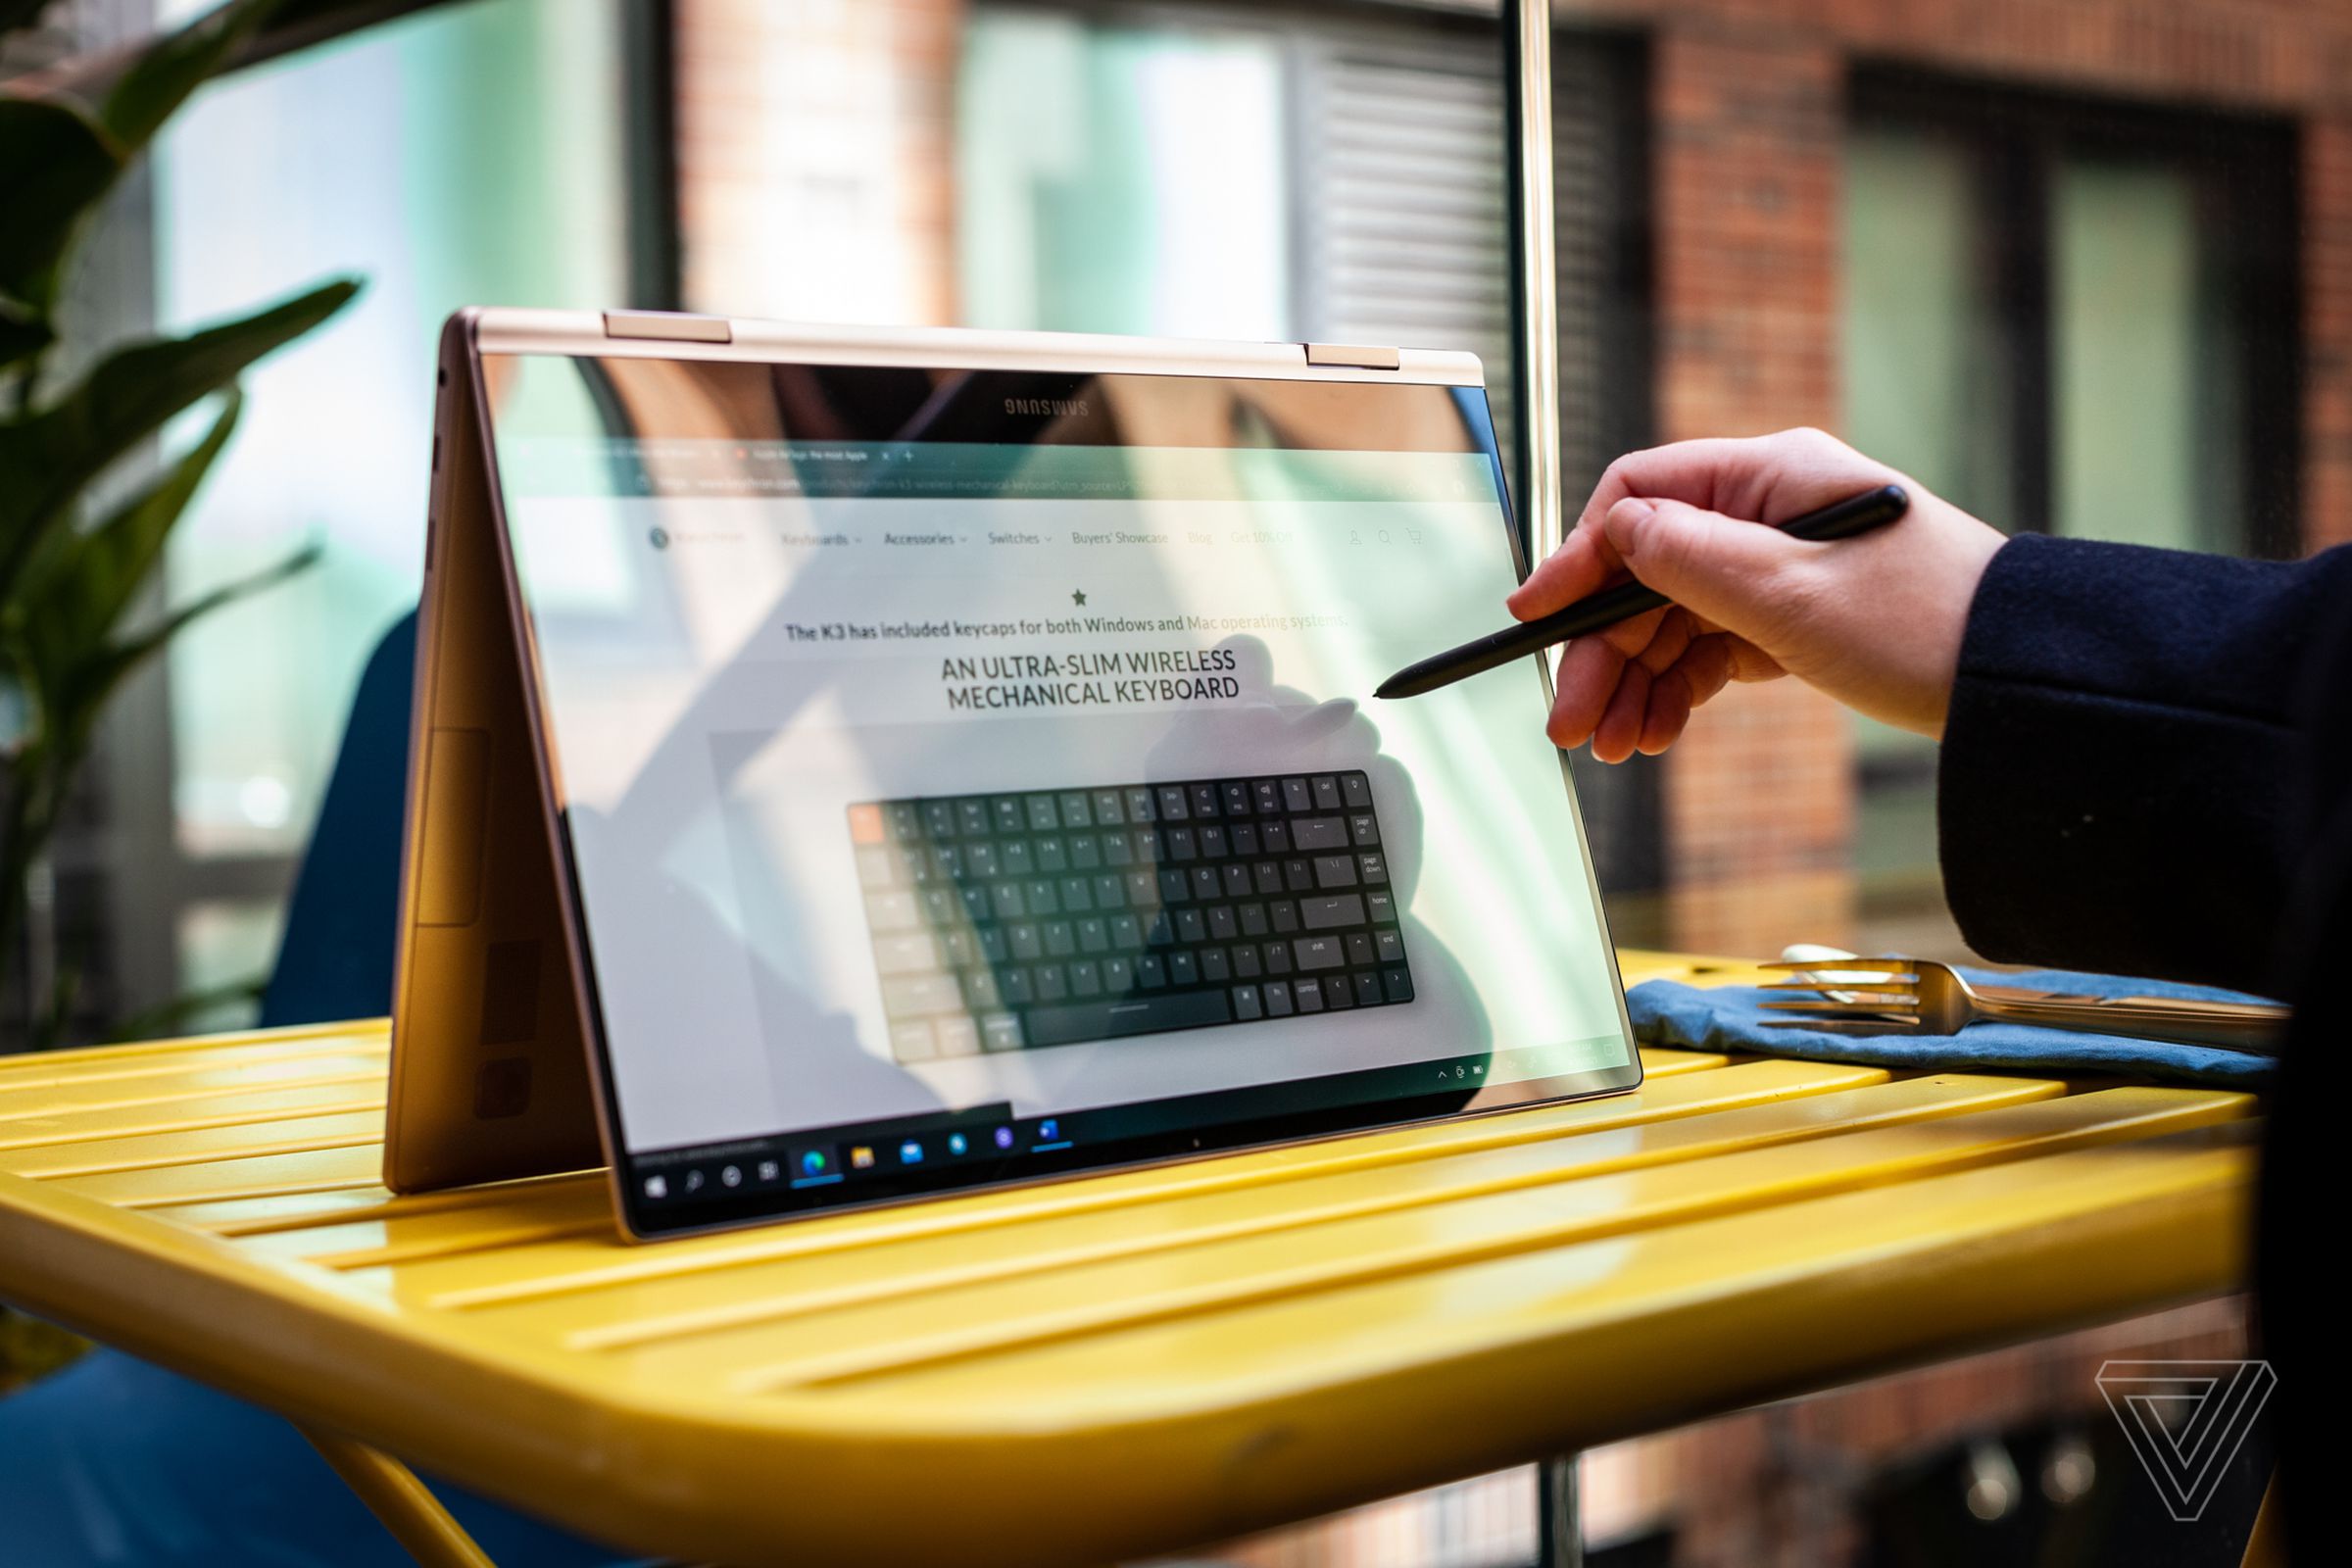 A user uses the Galaxy Book Pro 360 in tent mode on an outdoor picnic table with the S-Pen. The screen displays a mechanical keyboard review on The Verge.